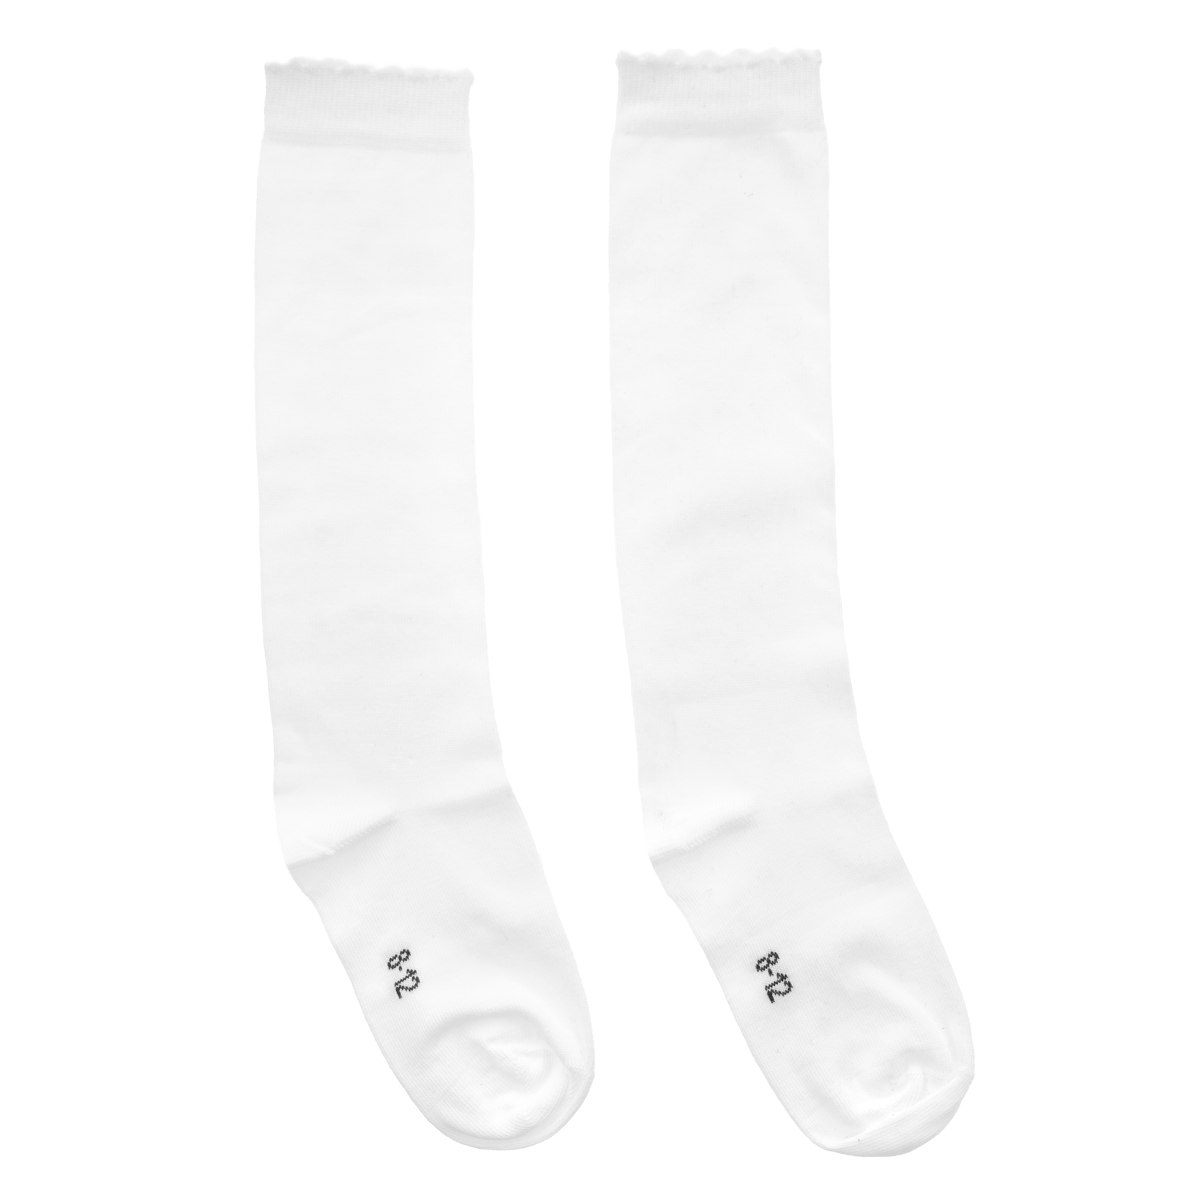 Eco Outfitters Fair Trade Organic Cotton Knee High Socks - White